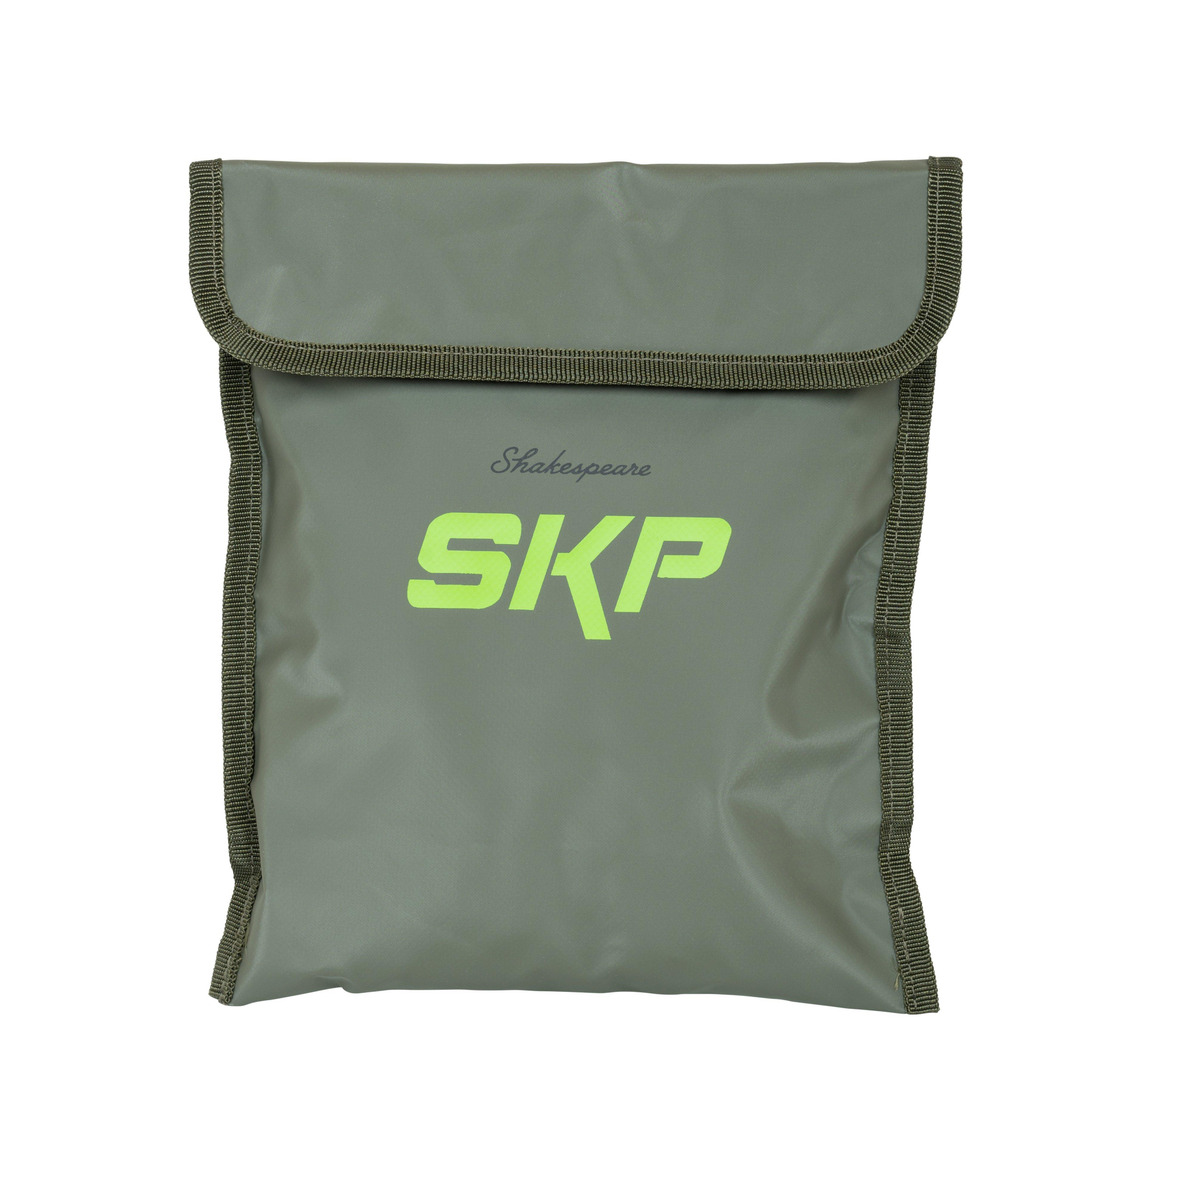 Shakespeare Skp Weigh And Retention Sling - L